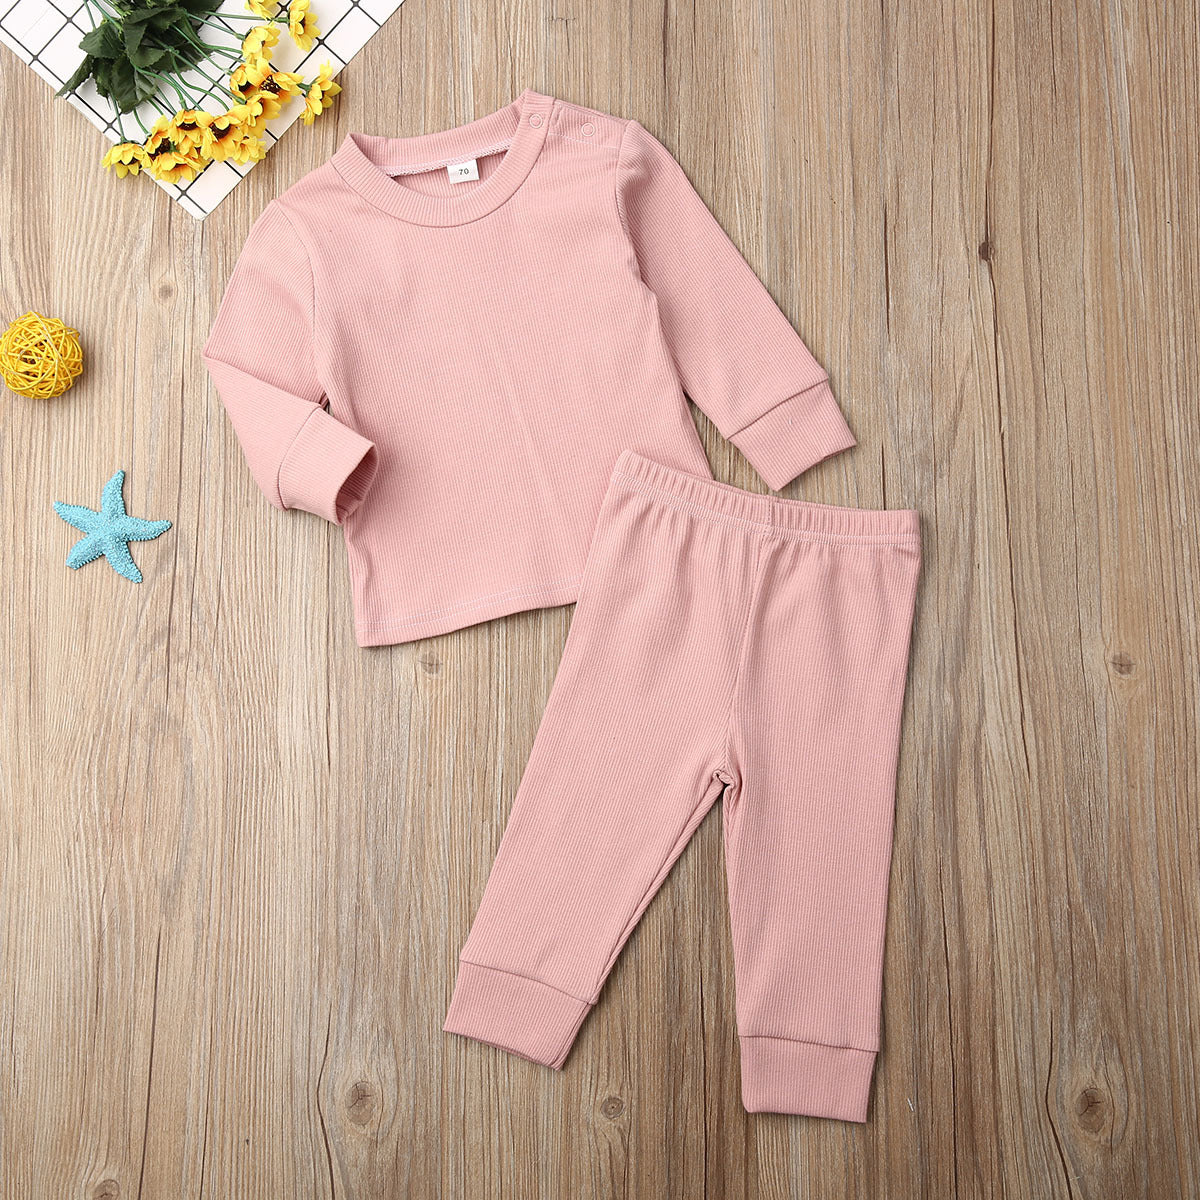 Pink Long Sleeve Lounge Outfit - 2pc set